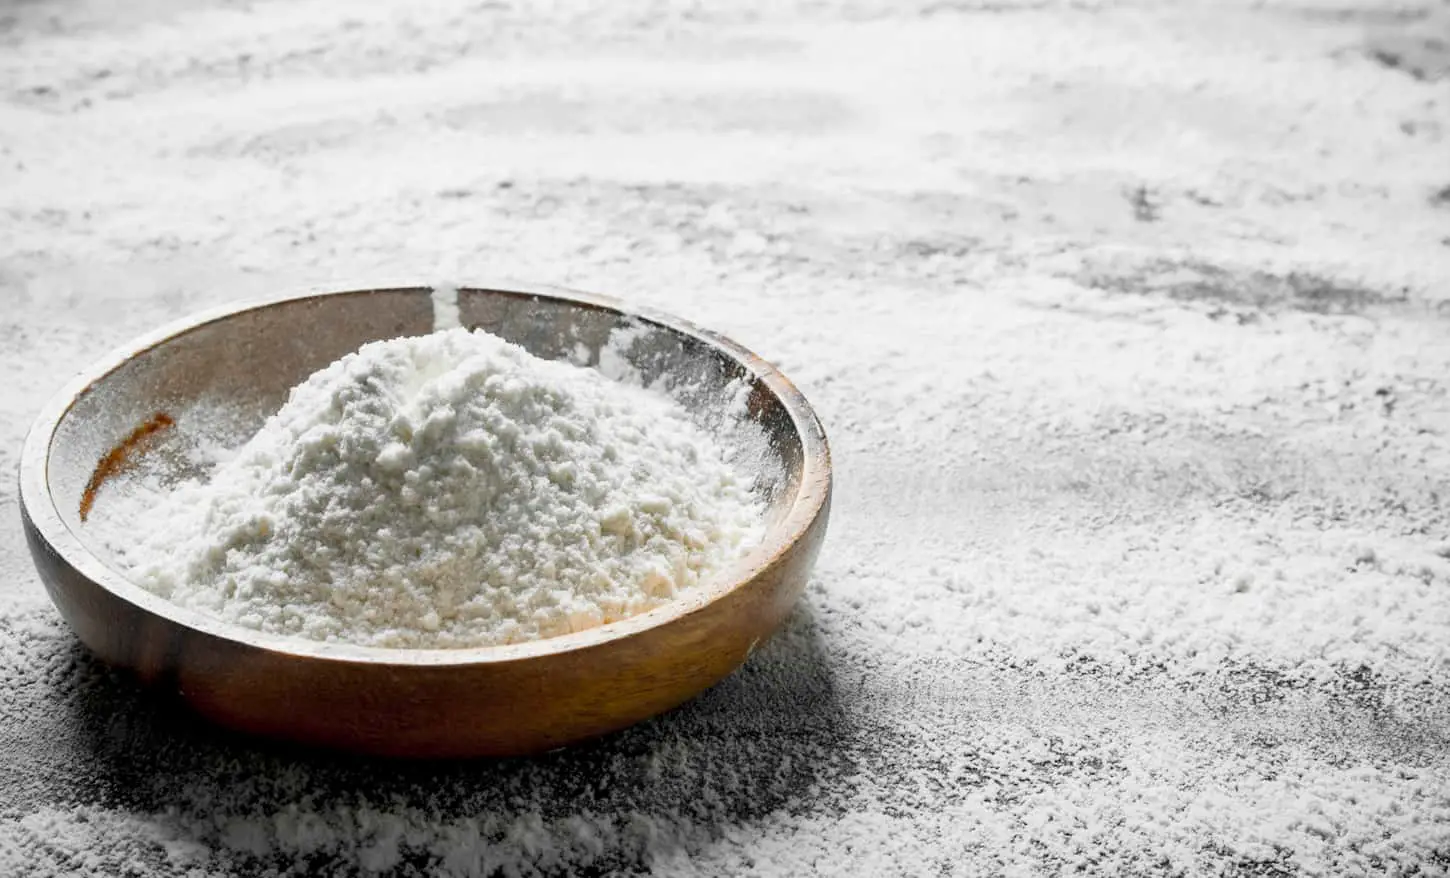 An image of Flour on a plate on a rustic background.